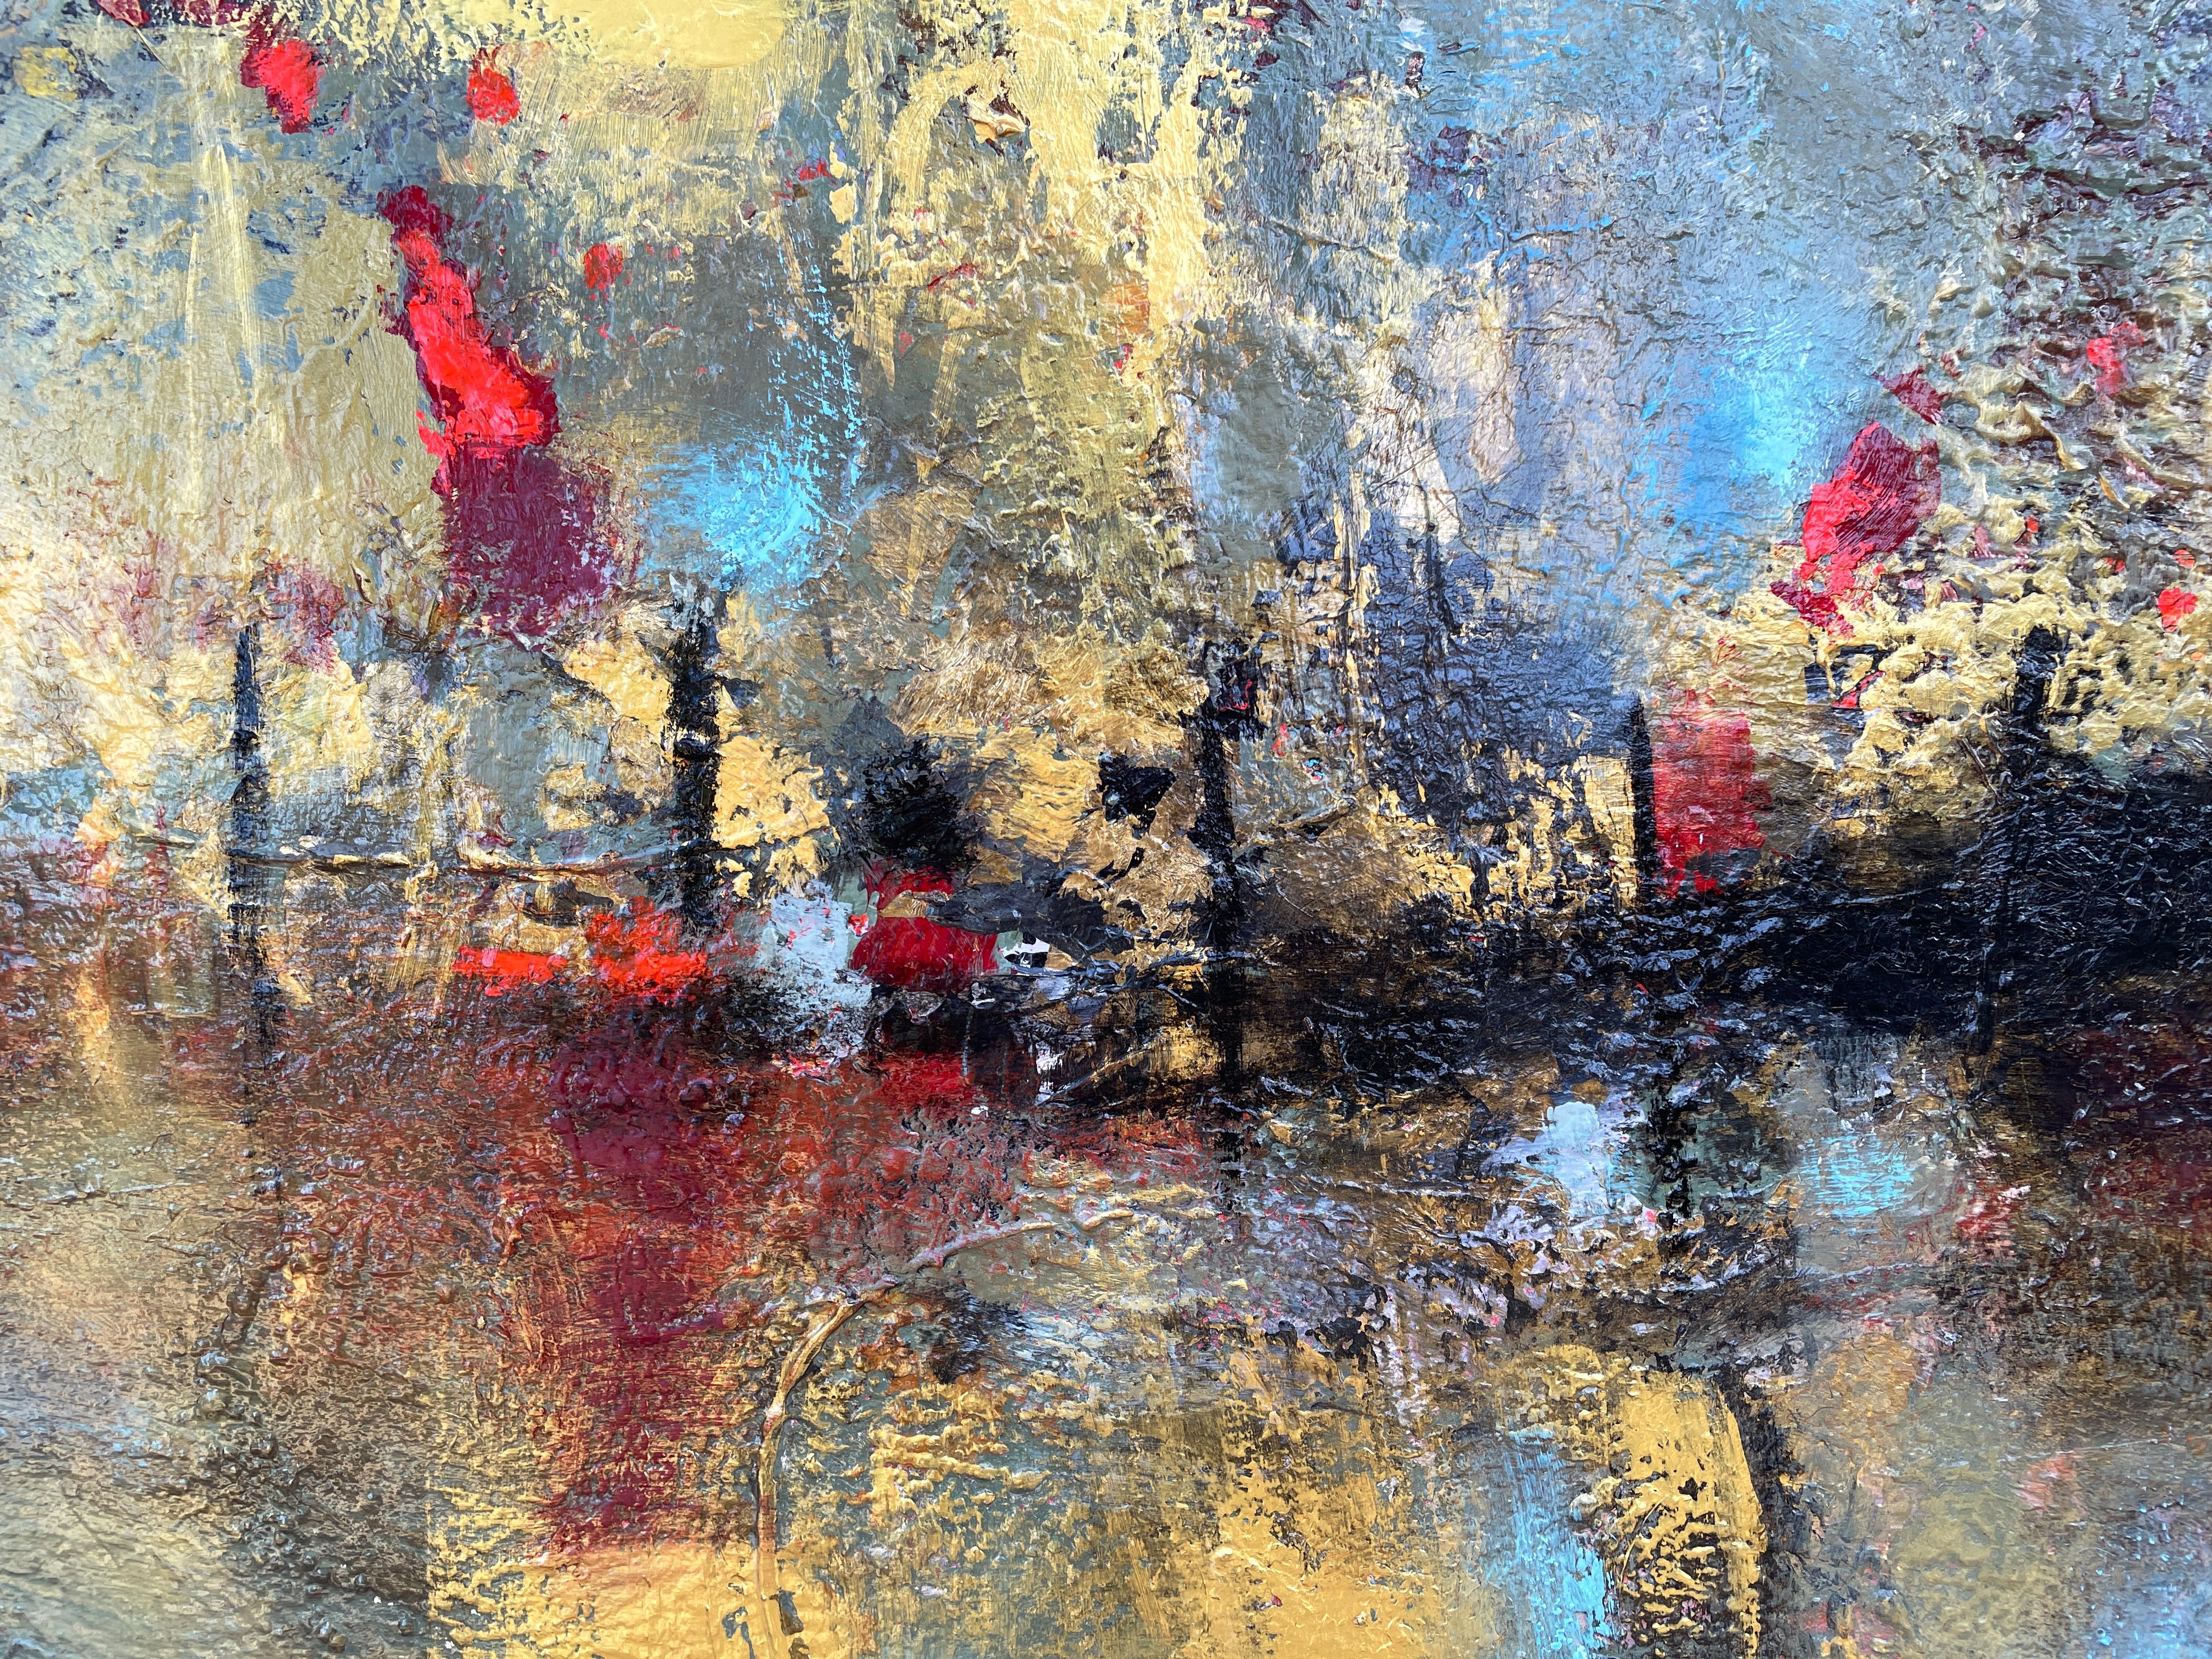 This artwork by Mary Titus is a quintessential example of abstract expressionism where the canvas becomes a field of emotive interaction. The piece, measuring 60